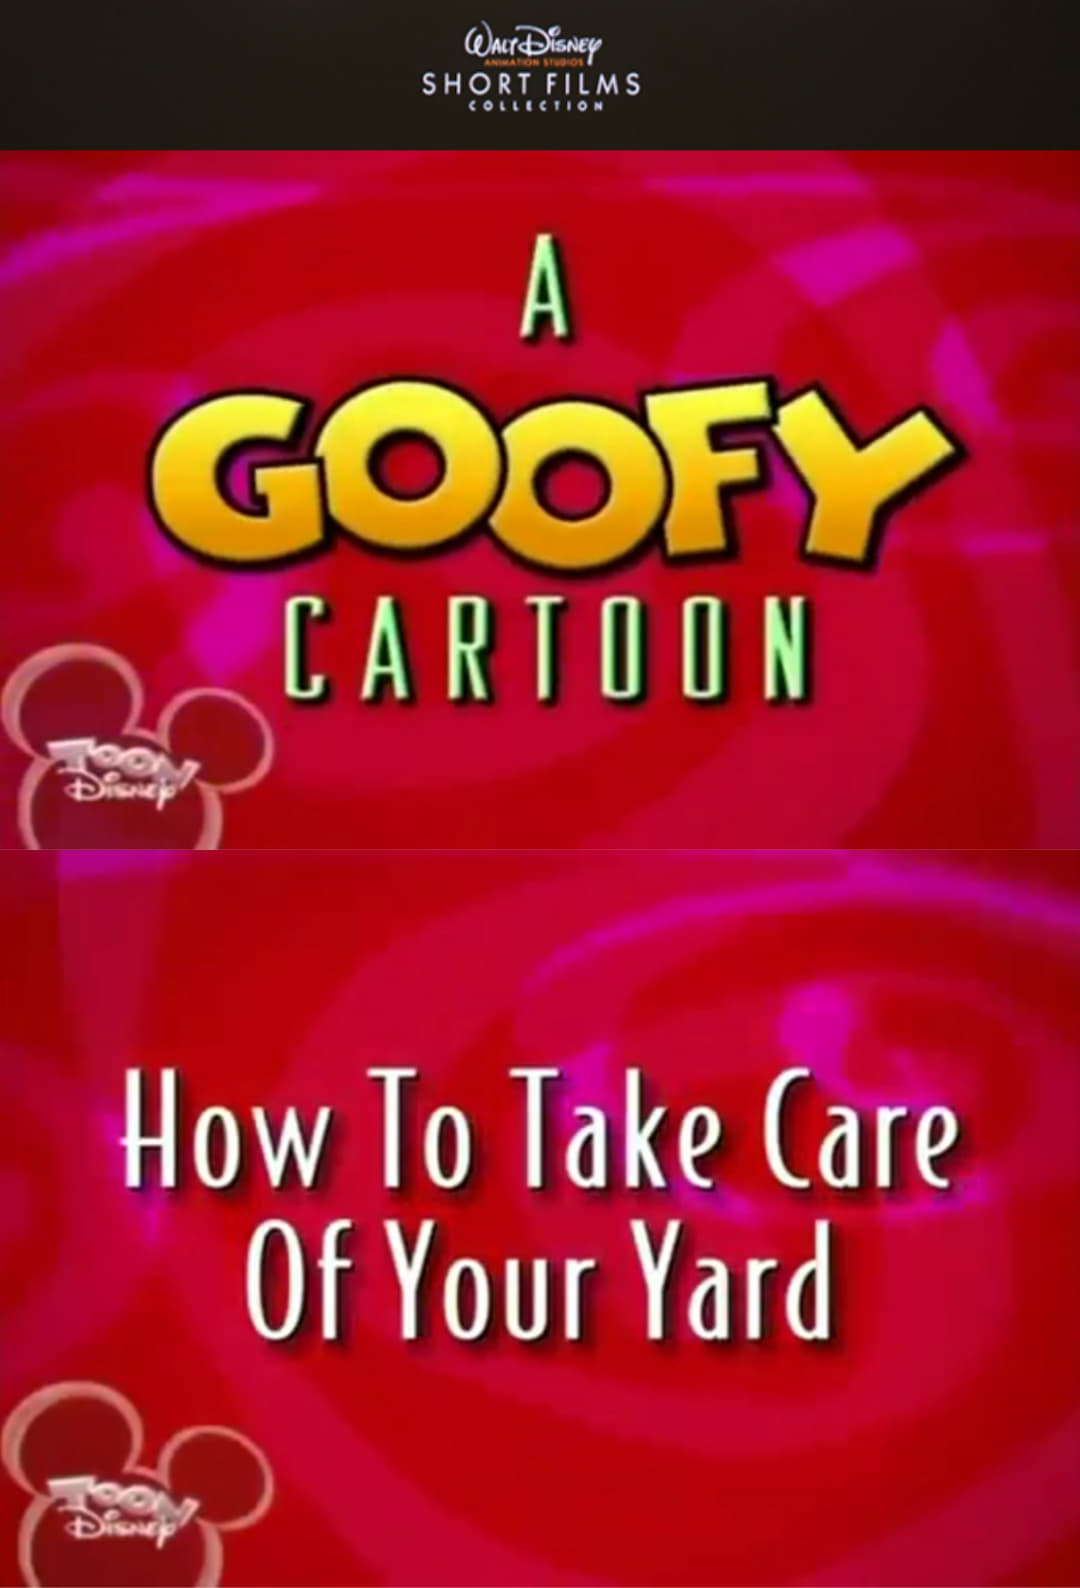 How to Take Care of Your Yard